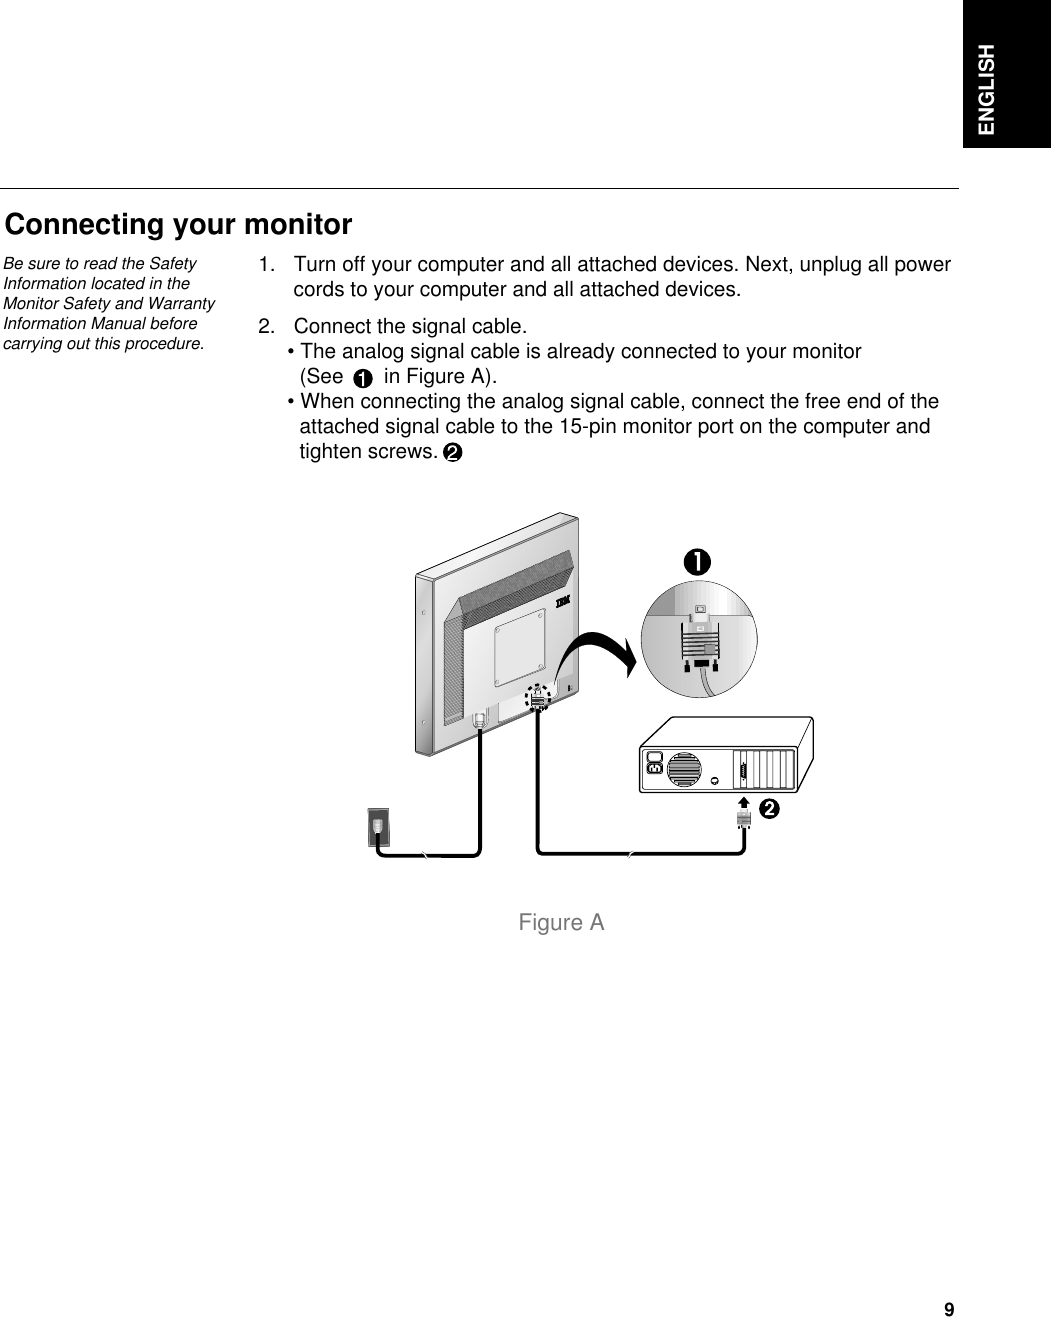 ENGLISH9Connecting your monitor1. Turn off your computer and all attached devices. Next, unplug all powercords to your computer and all attached devices.2. Connect the signal cable.• The analog signal cable is already connected to your monitor (See       in Figure A).• When connecting the analog signal cable, connect the free end of the attached signal cable to the 15-pin monitor port on the computer and tighten screws.Figure ABe sure to read the SafetyInformation located in theMonitor Safety and WarrantyInformation Manual beforecarrying out this procedure.